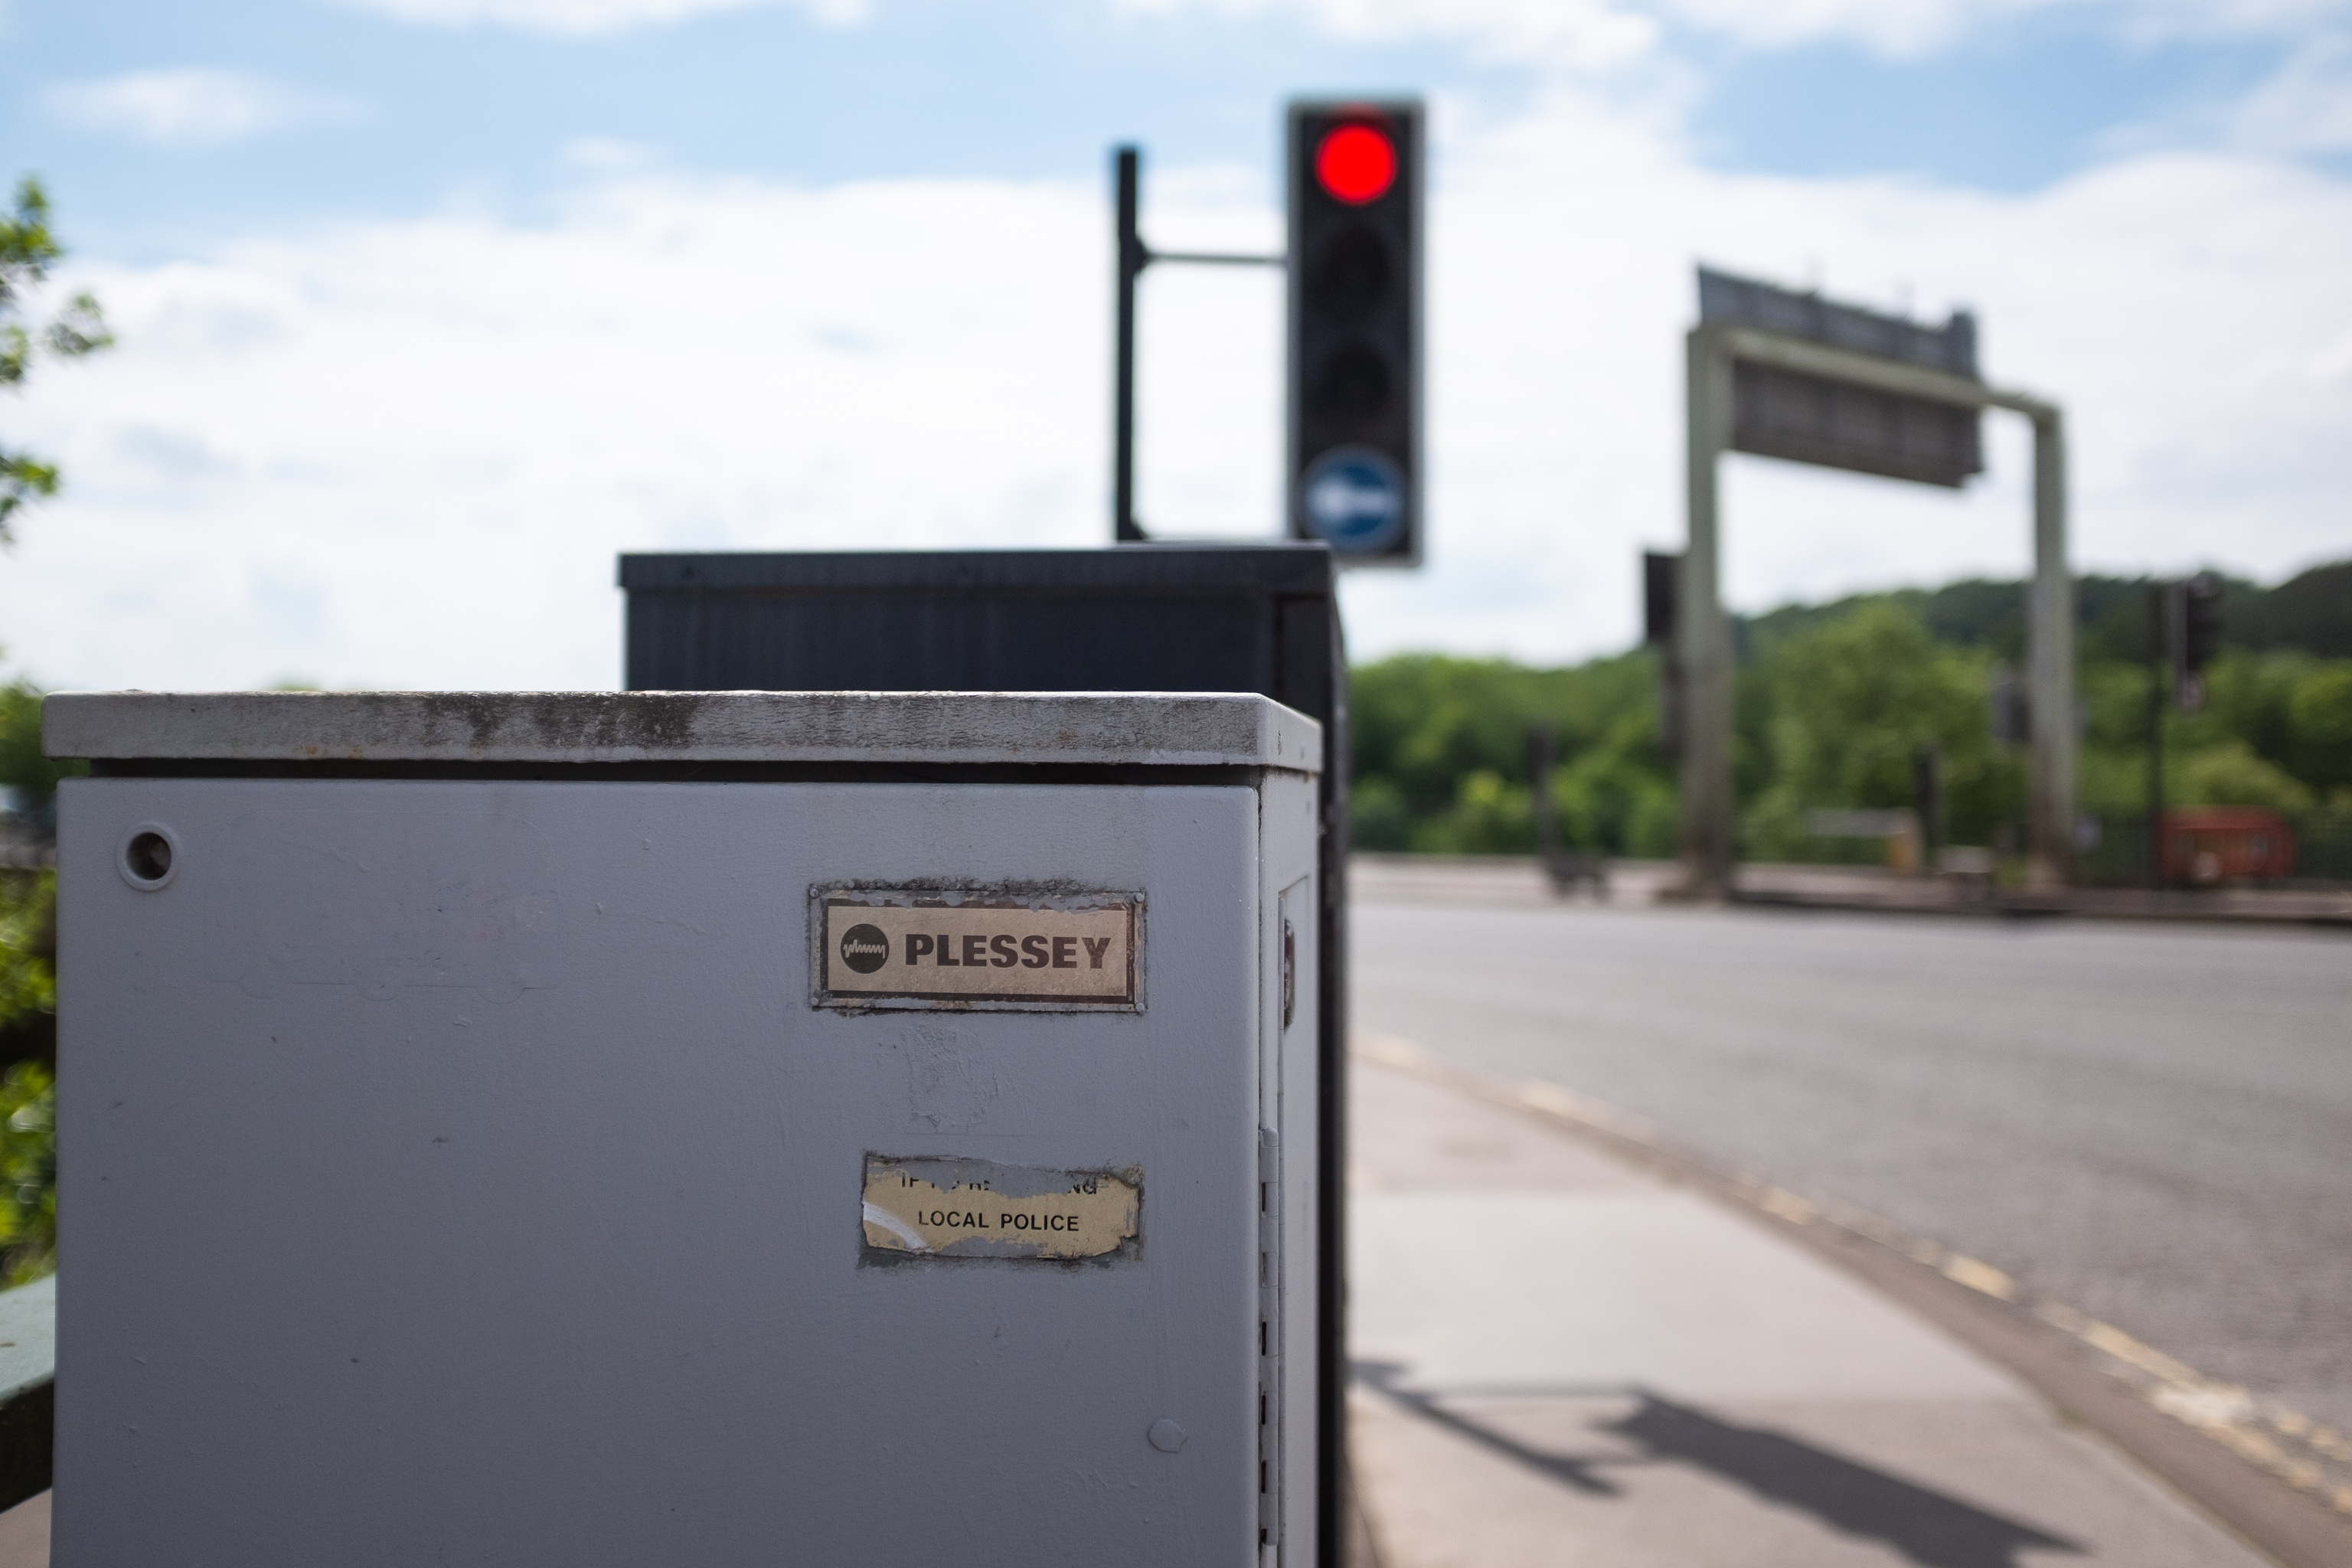 Plessey
Traffic light control box, I assume. It's about as far from home as I am, as Plessey's headquarters were in Ilford, not far from where I grew up. G...